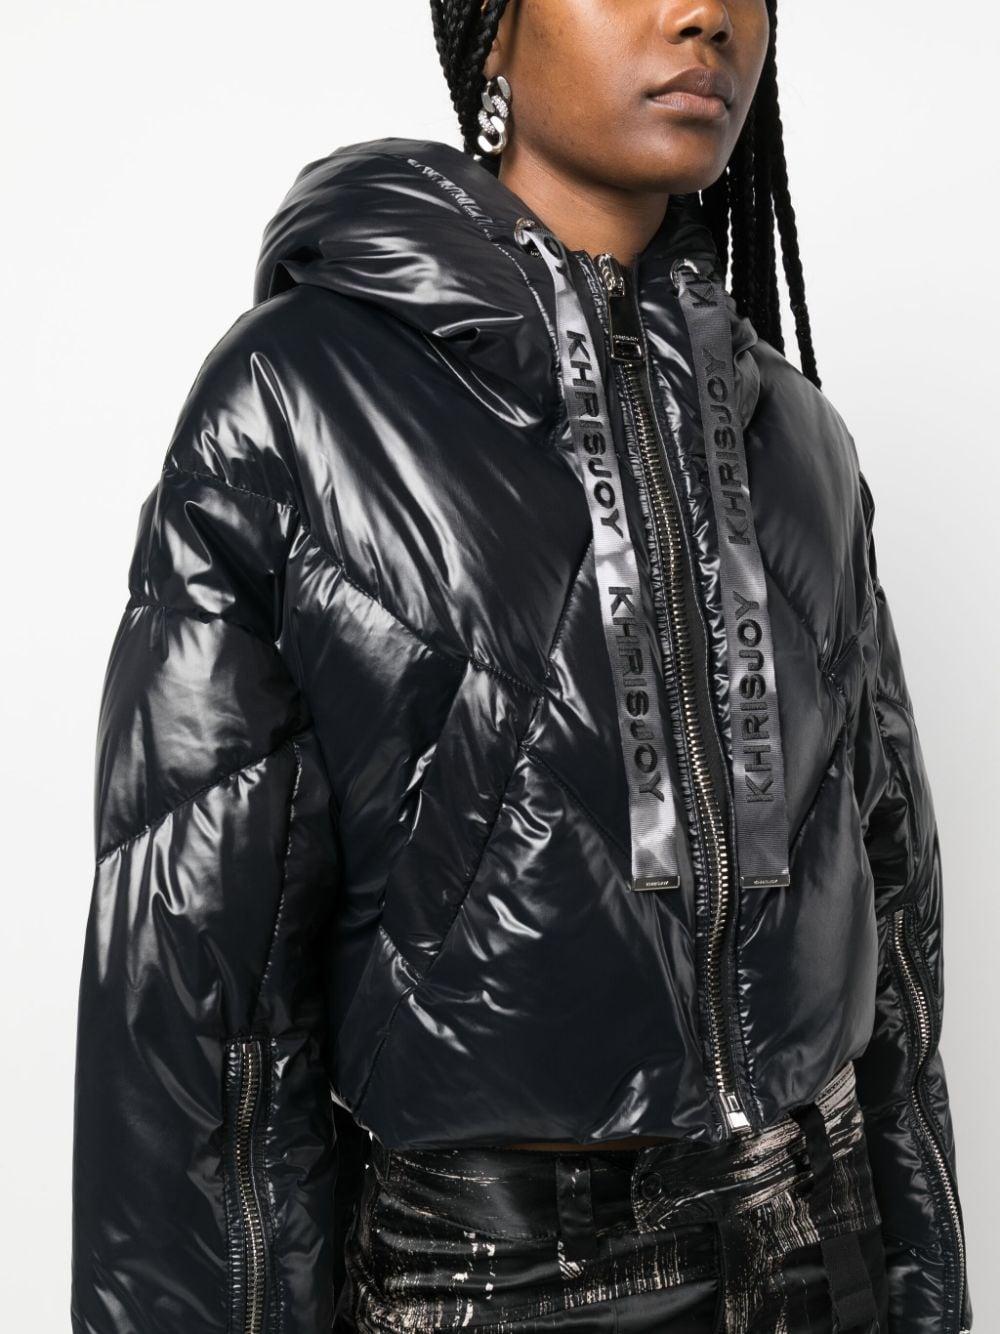 Khrisjoy Quilted Cropped zip-up Ski Jacket - Farfetch